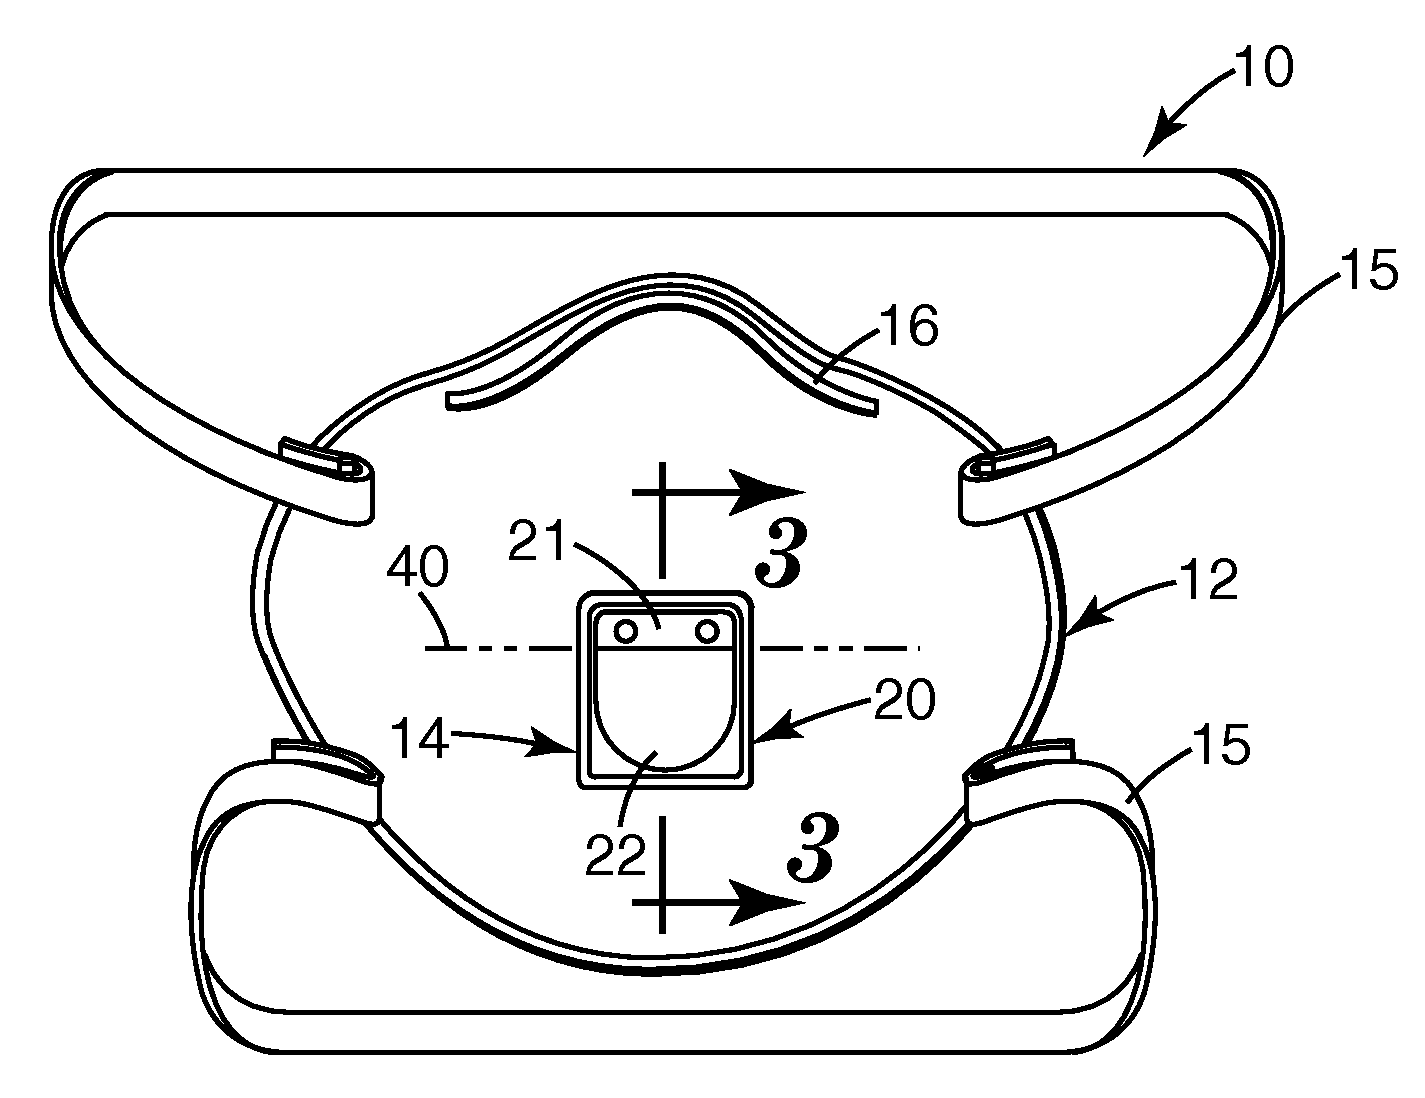 Filtering Face Mask with a Unidirectional Valve Having a Stiff Unbiased Flexible Flap